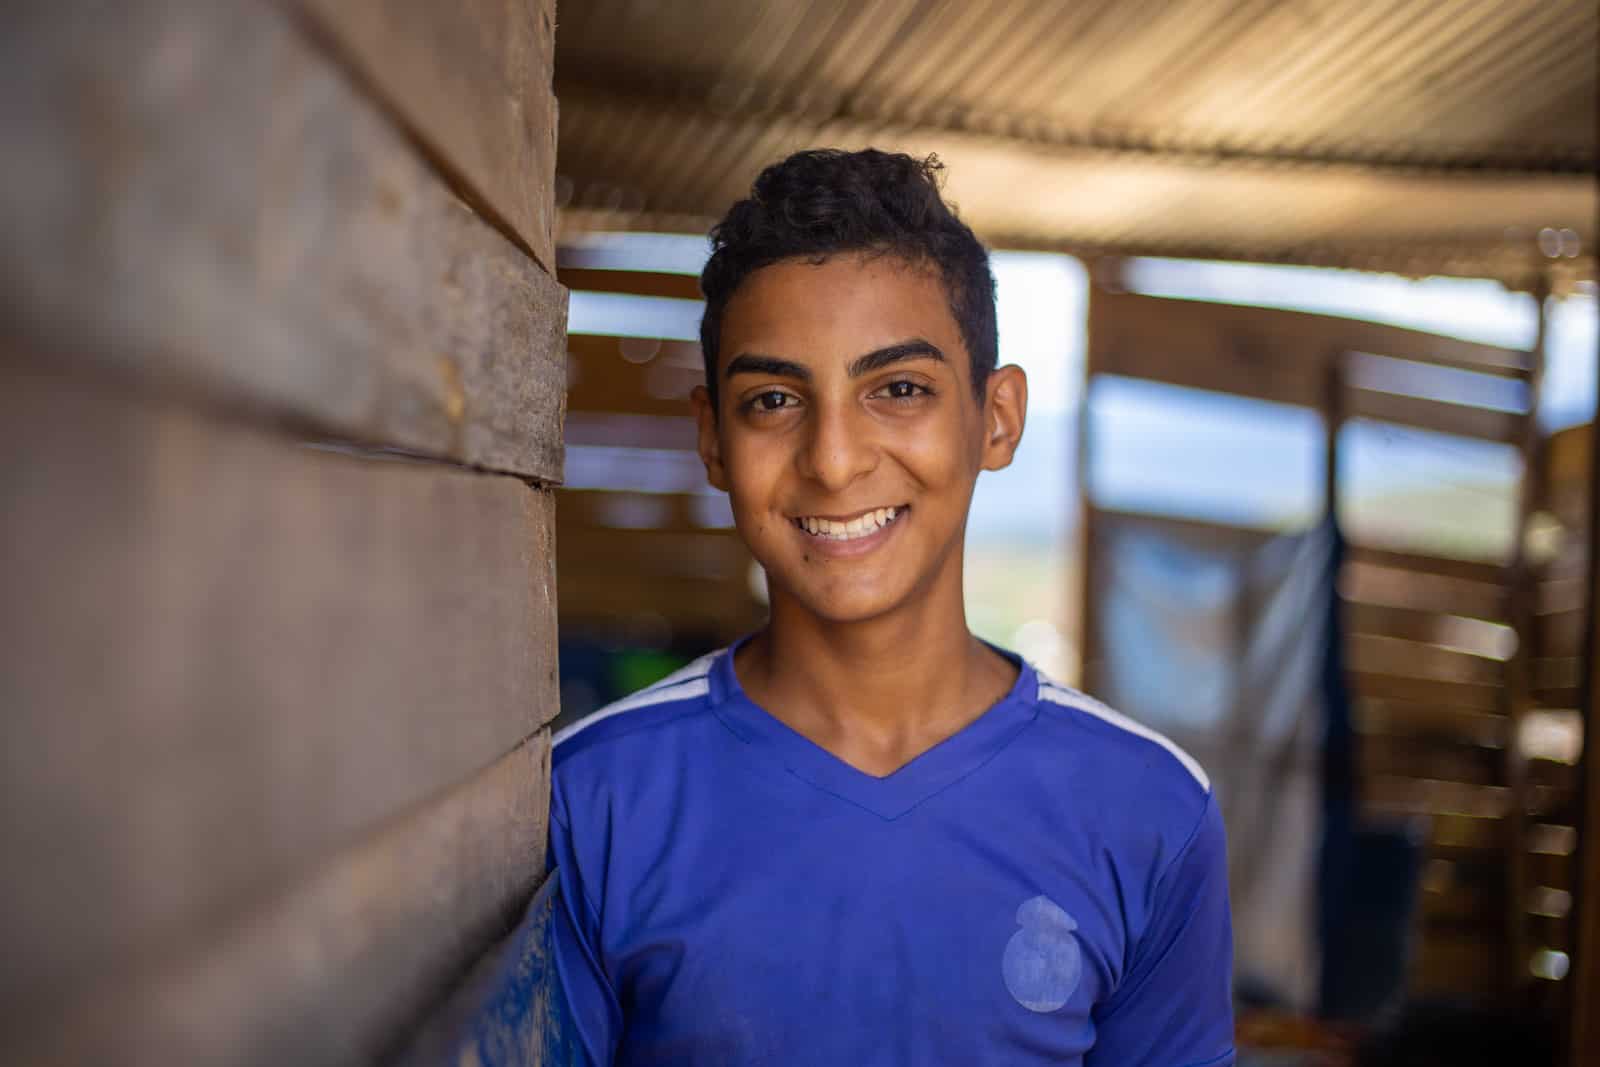 A teen boy in a blue shirt smiles at the camera inside a wooden house.